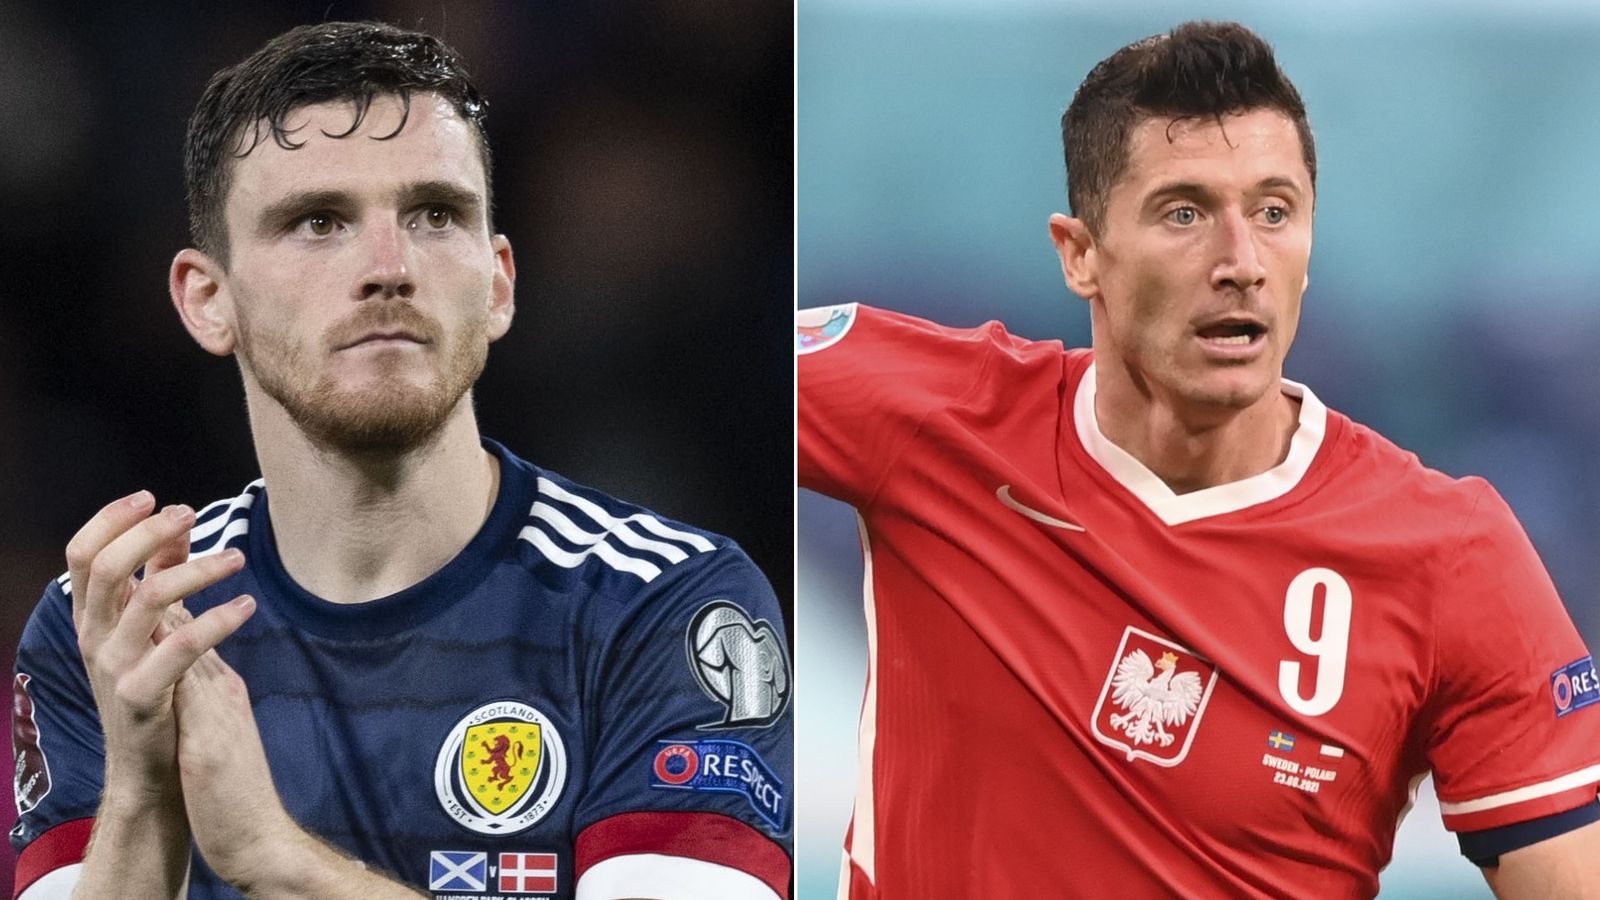 Scotland vs Poland friendly to take place at Hampden Park on March 24